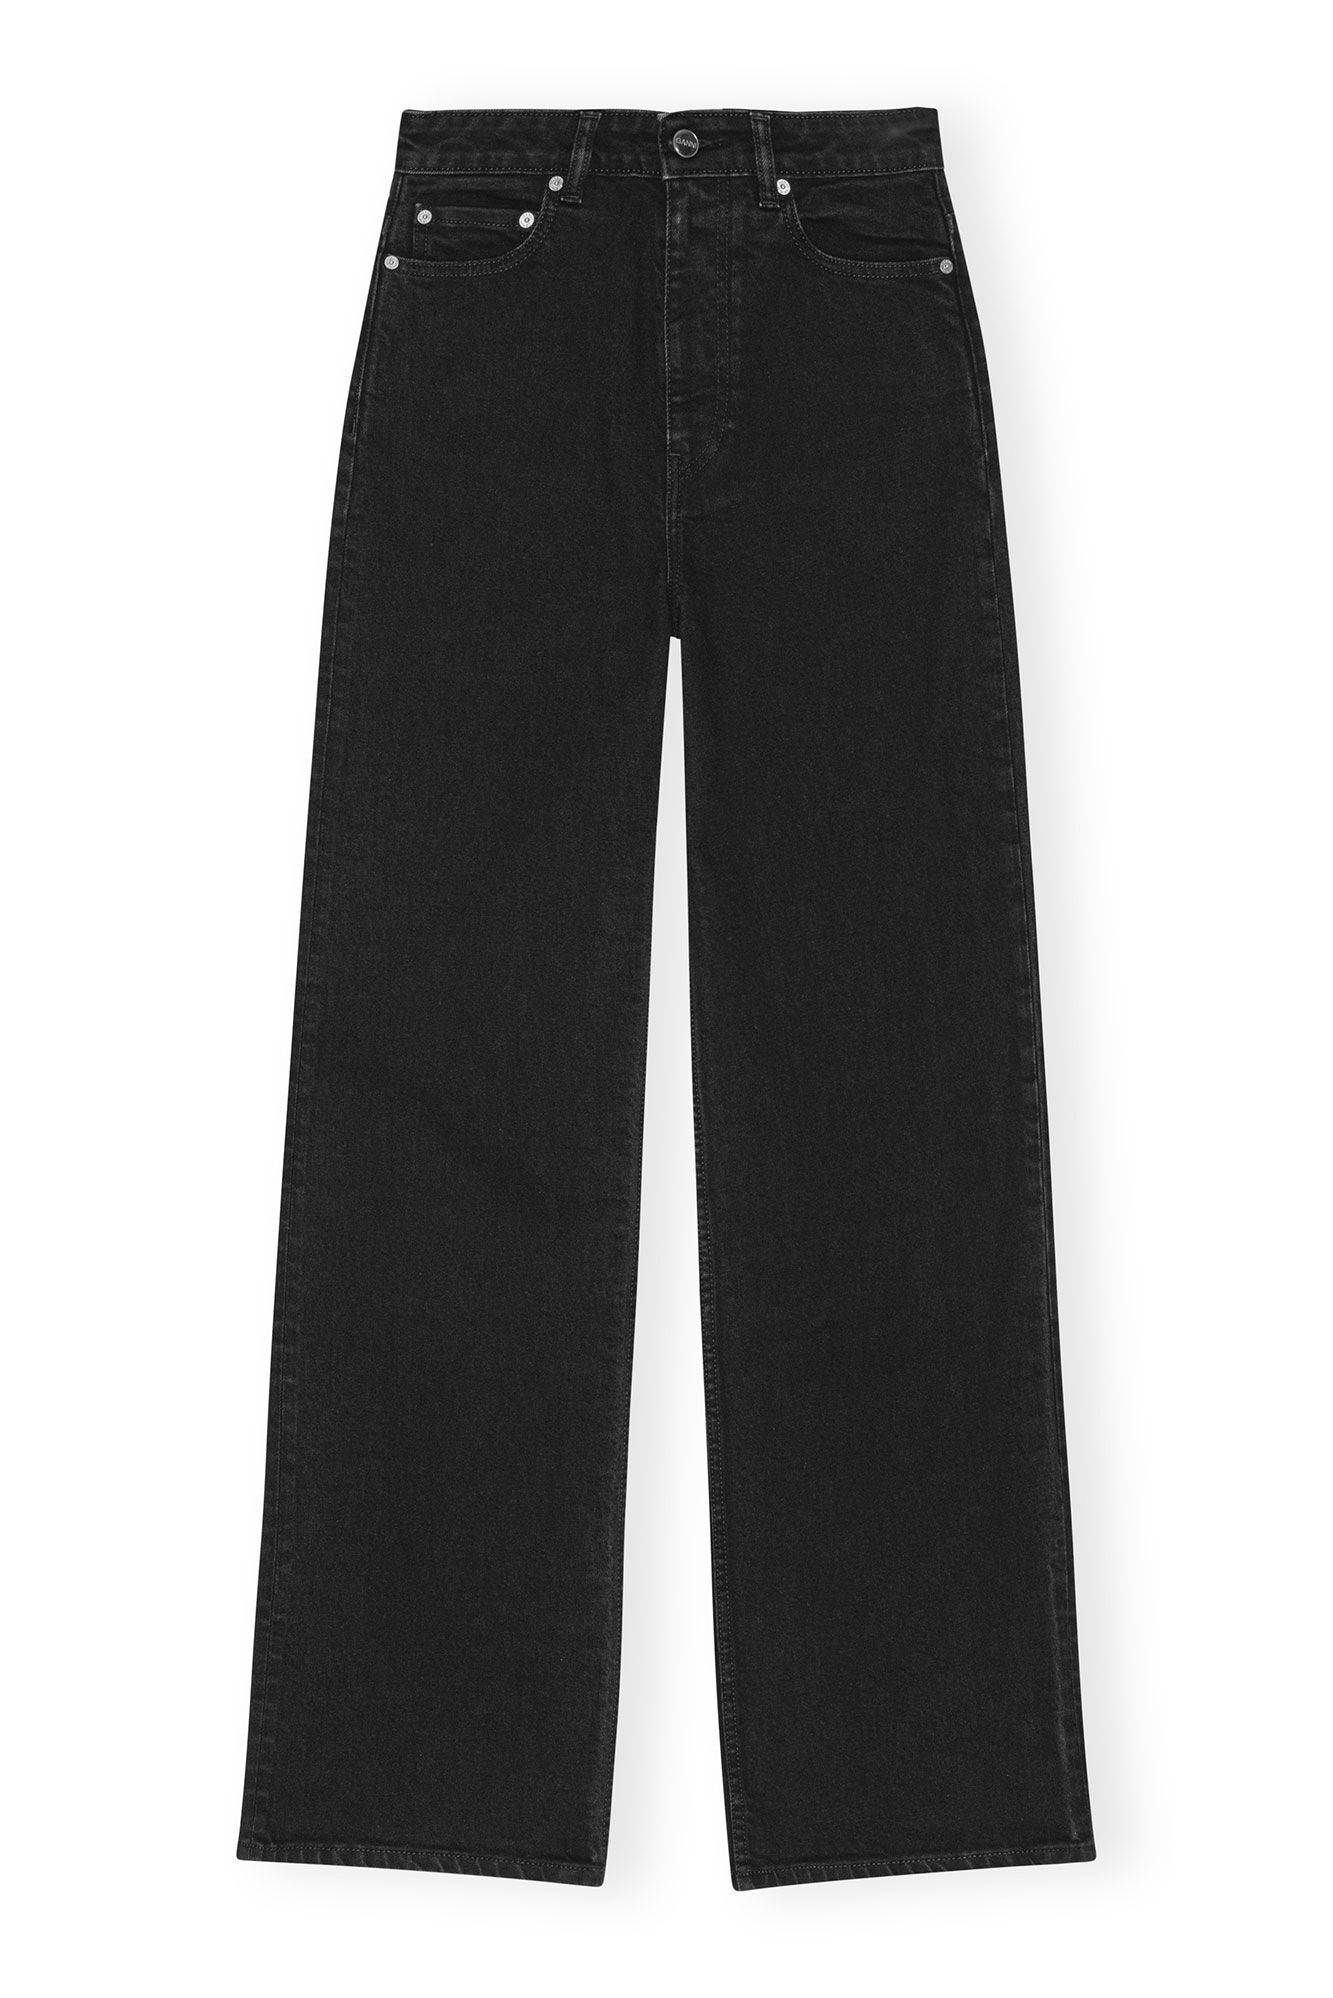 WASHED BLACK ANDI JEANS - 1